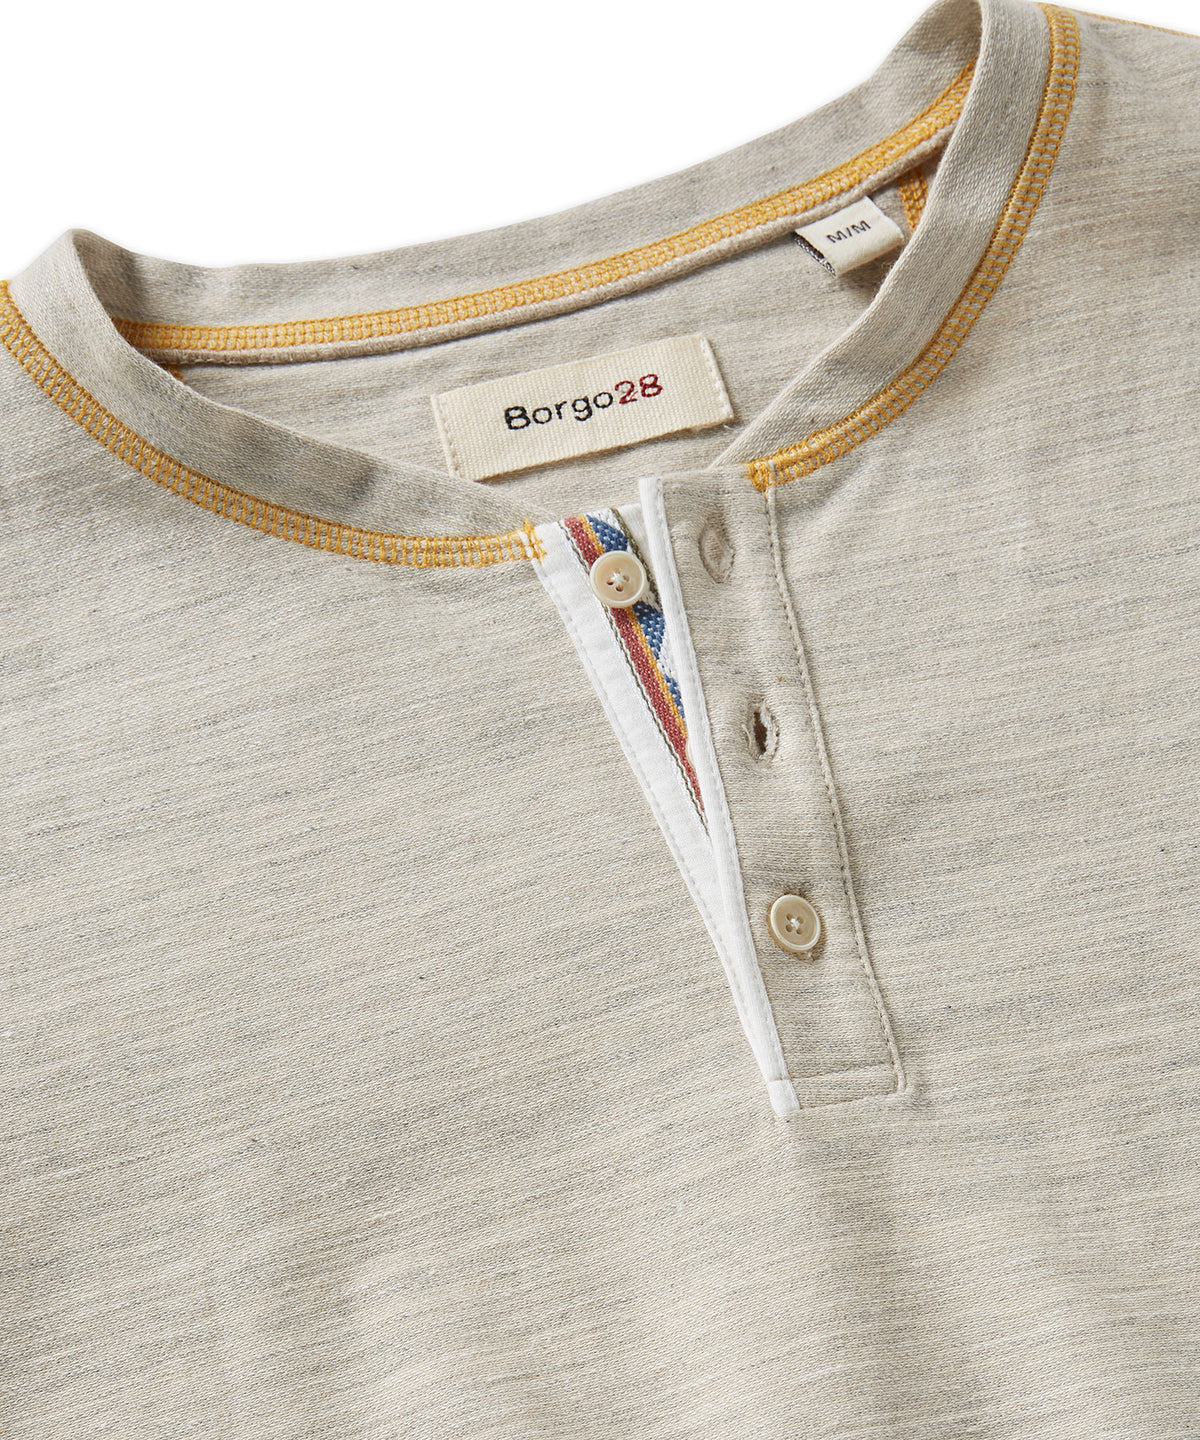 Contrast Stitching Long-Sleeve Henley